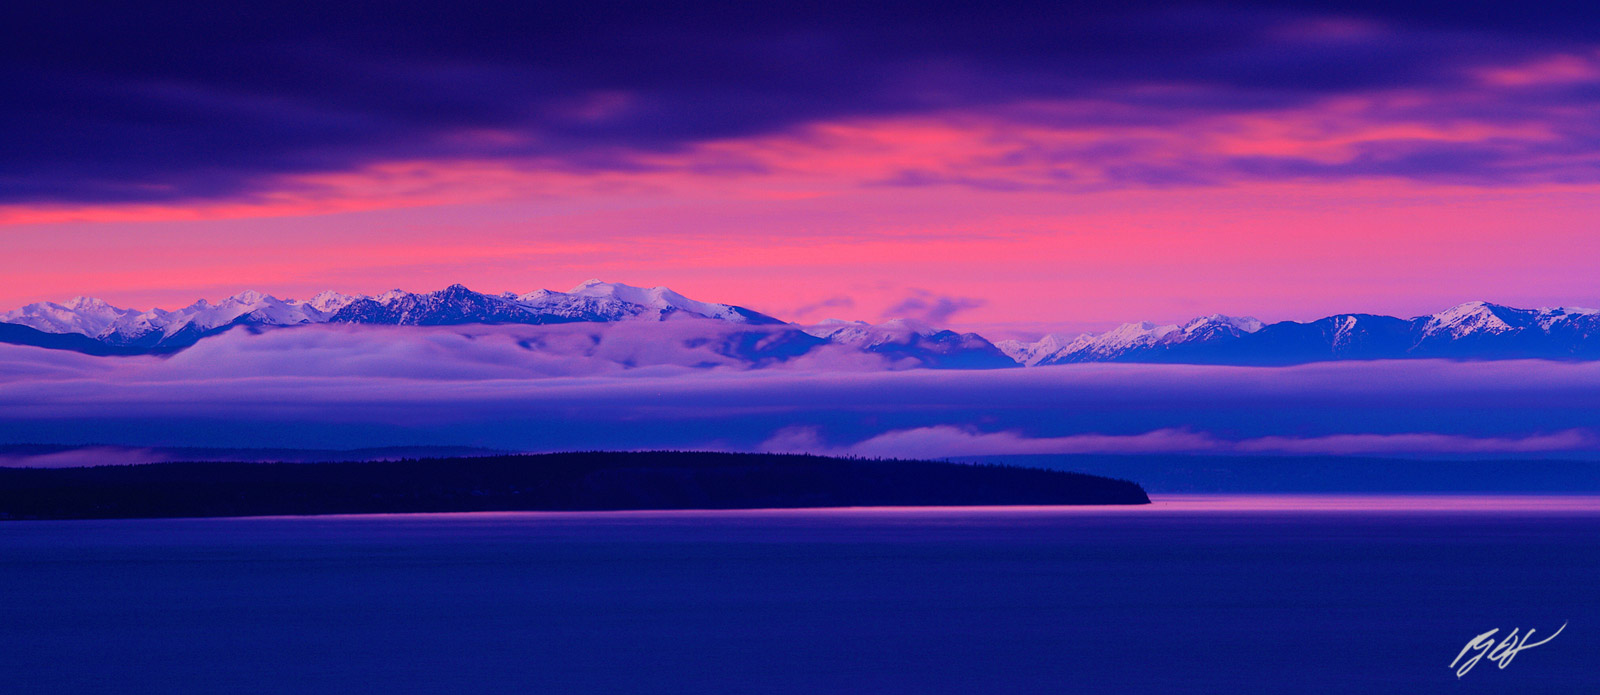 Sunrise with the Olympic Mountains in the Clouds from Whidbey Island, Washington